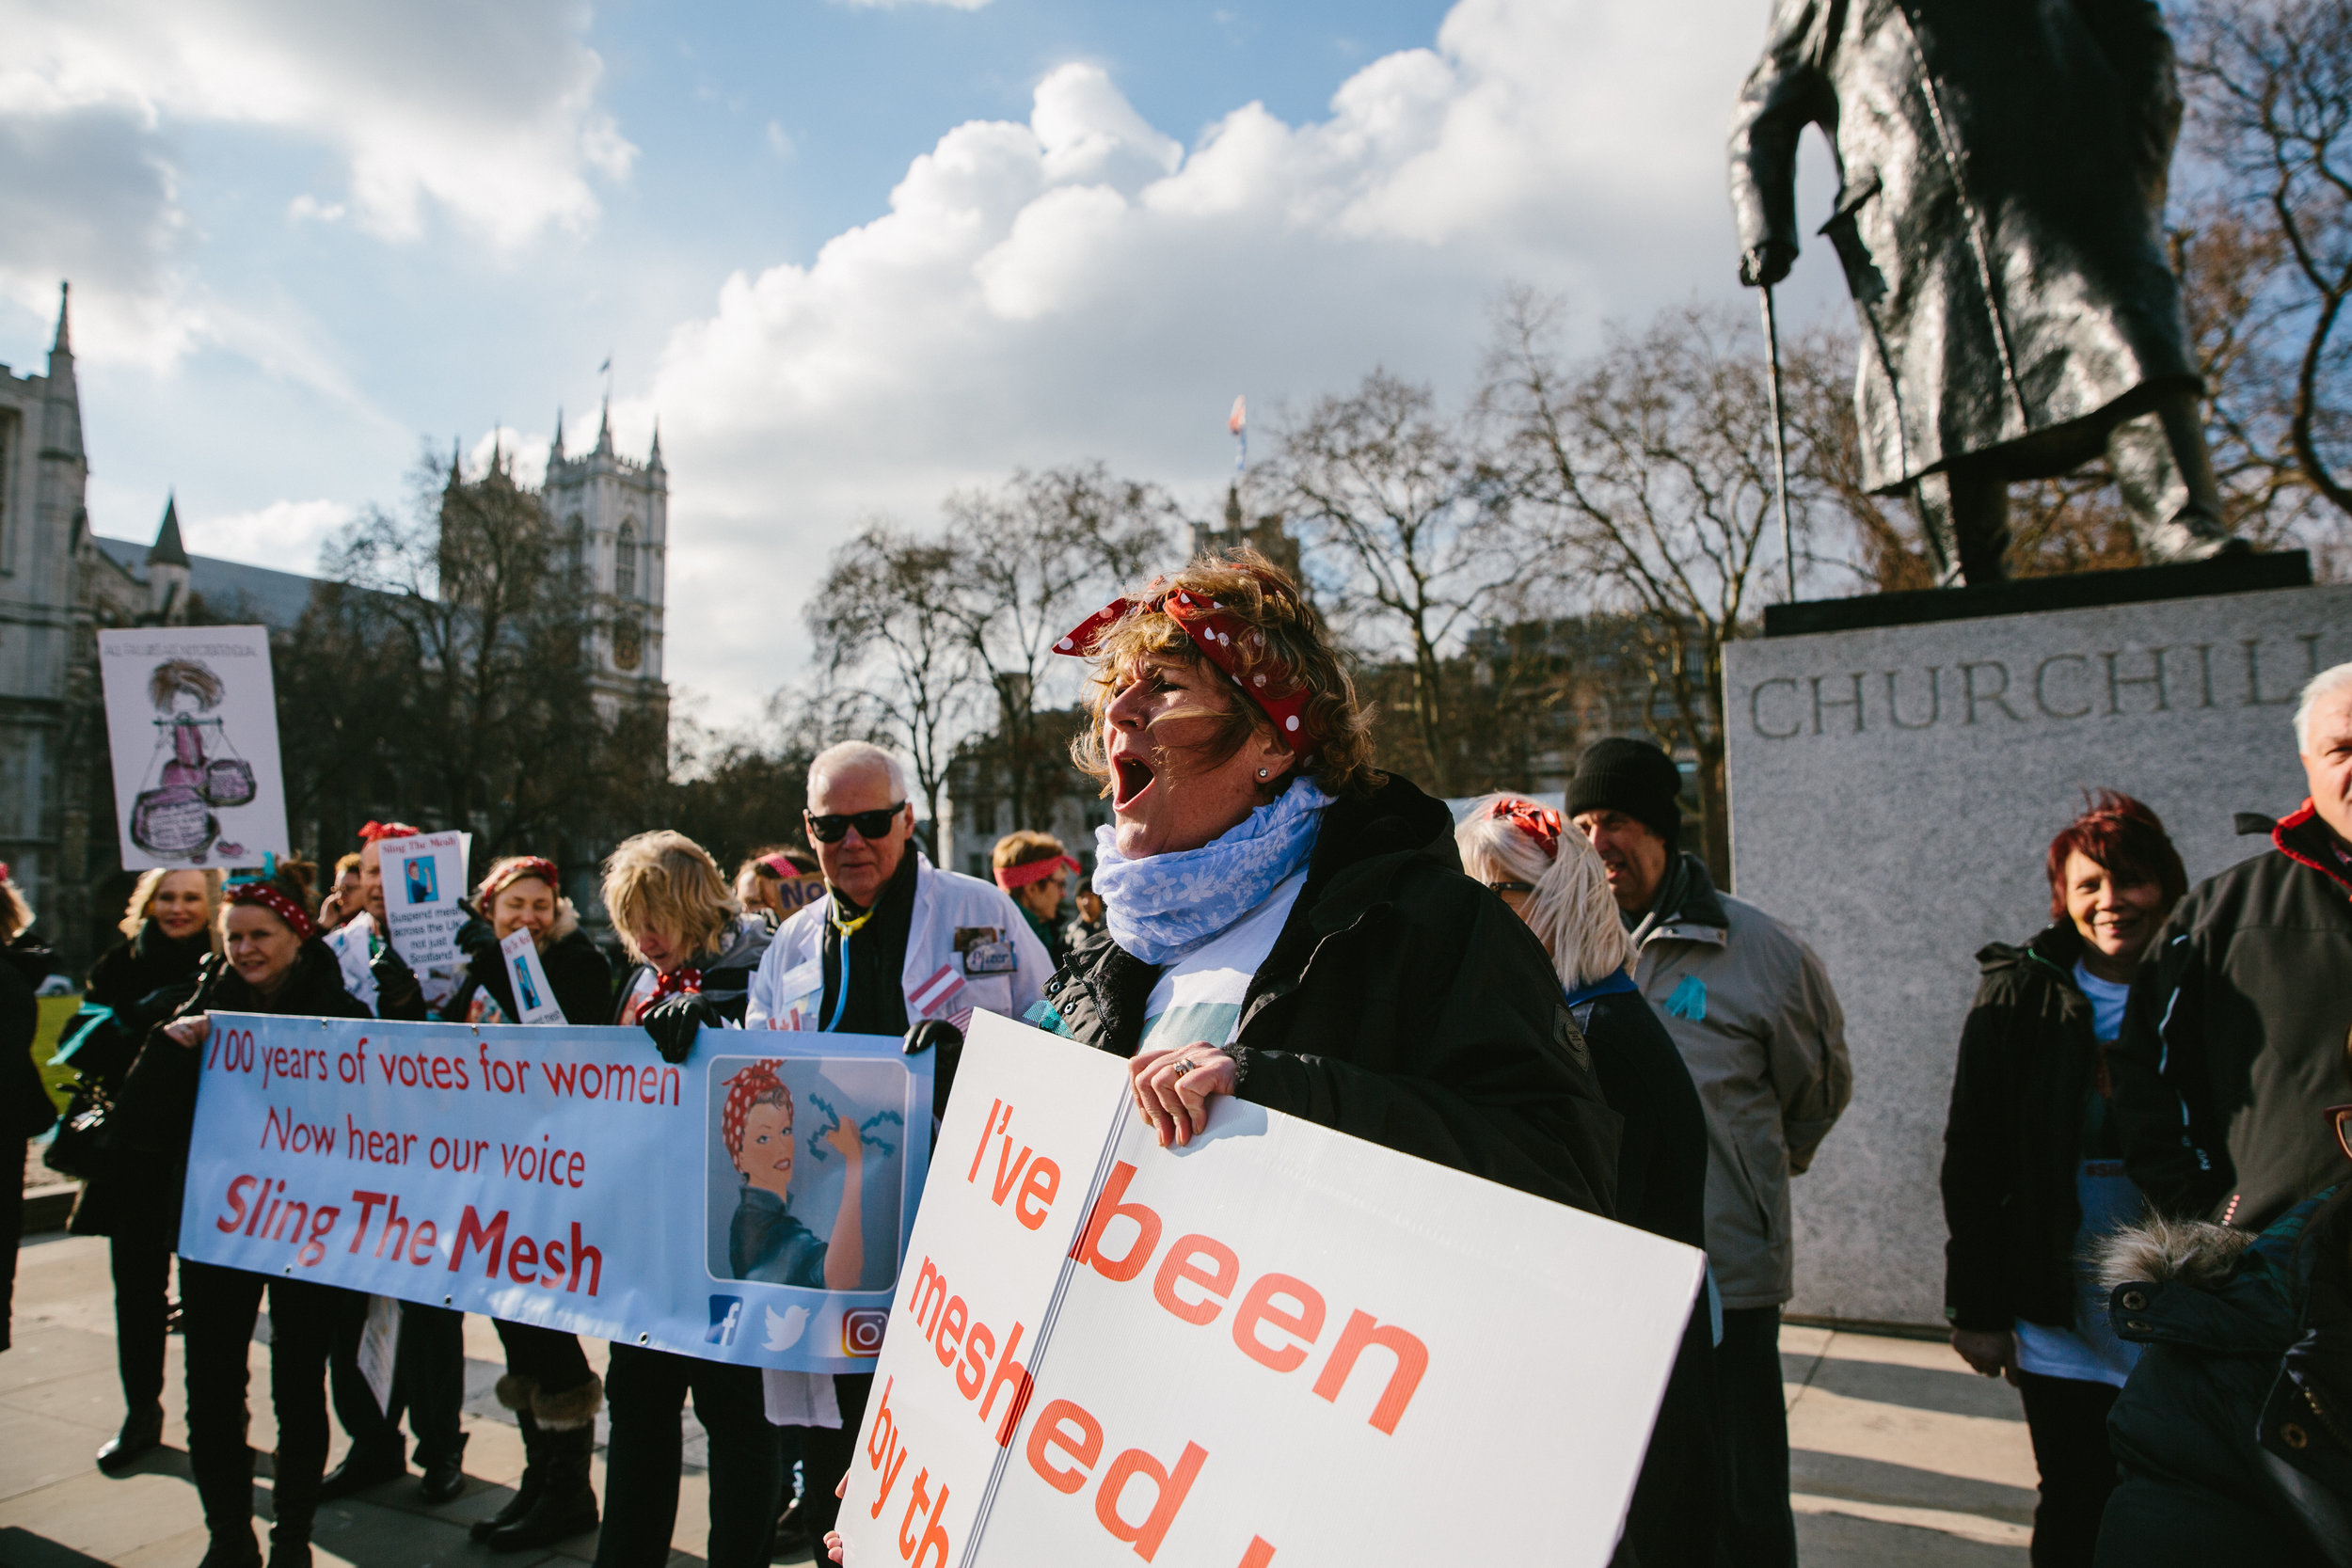  Campaigners shared their concerns with the public in Parliament Square, many of whom had never heard of mesh - sometimes called ‘tape’ - or the effects that it can have       